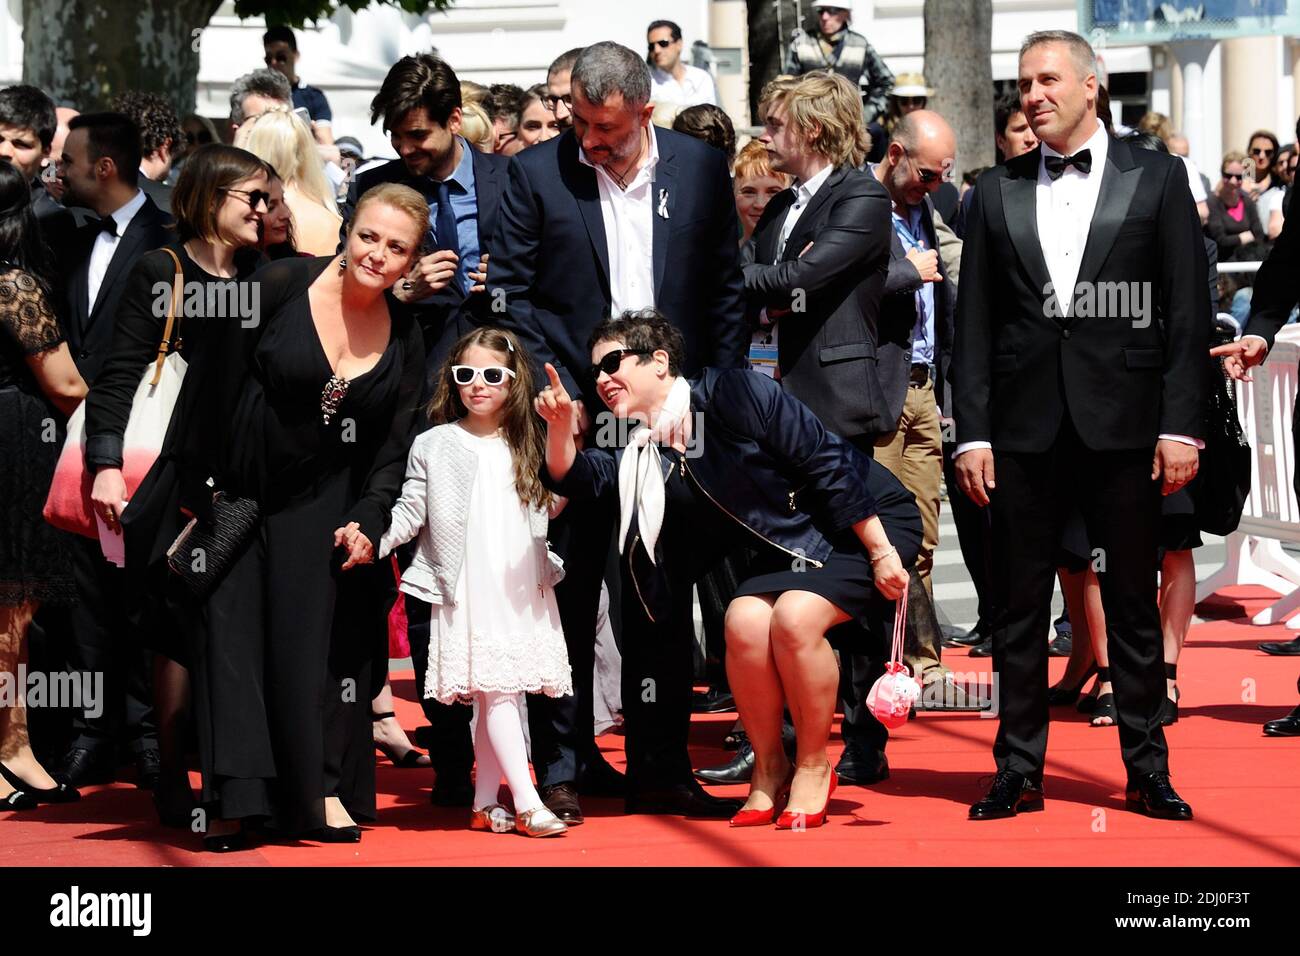 Cristi Puiu, Zoe Puiu, Anca Puiu, Dana Dogaru and Mimi Branescu attending the 'Sieranevada' Screening at the Palais Des Festivals in Cannes, France on May 12, 2016, as part of the 69th Cannes Film Festival. Photo by Aurore Marechal/ABACAPRESS.COM Stock Photo